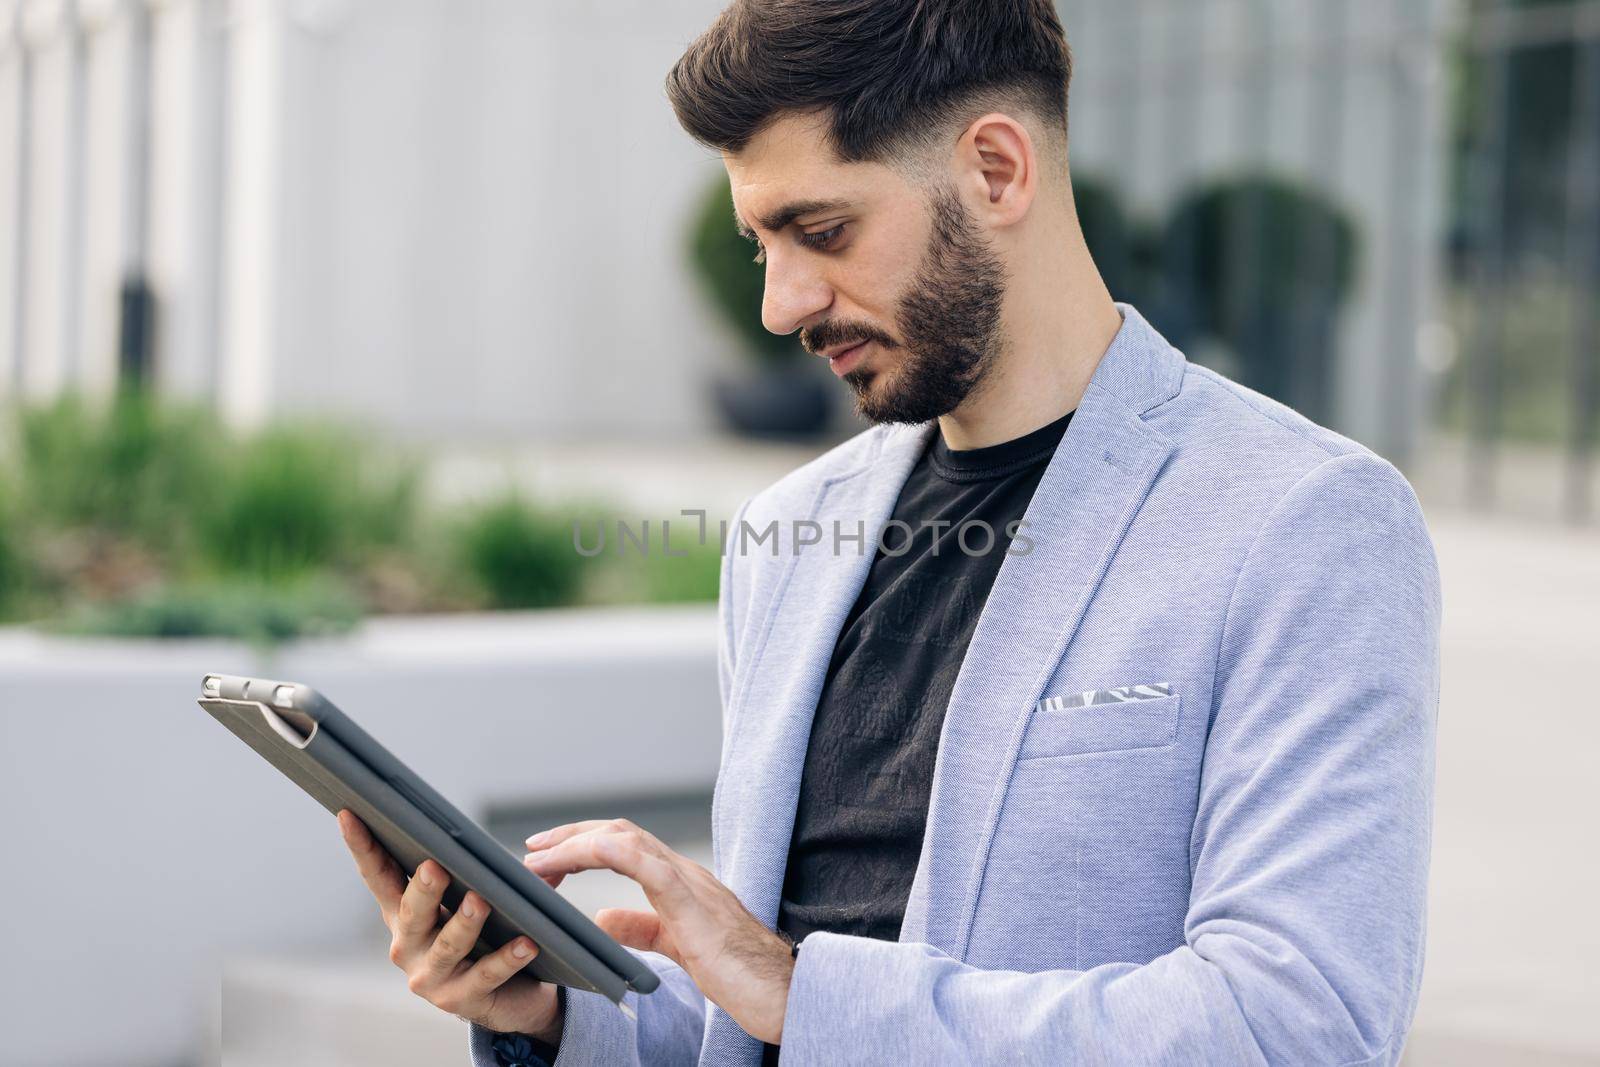 Elegant male chatting online with digital device outside. Businessman holding tablet in hands using business apps on tablet computer. Happy face looking tablet screen outdoors by uflypro